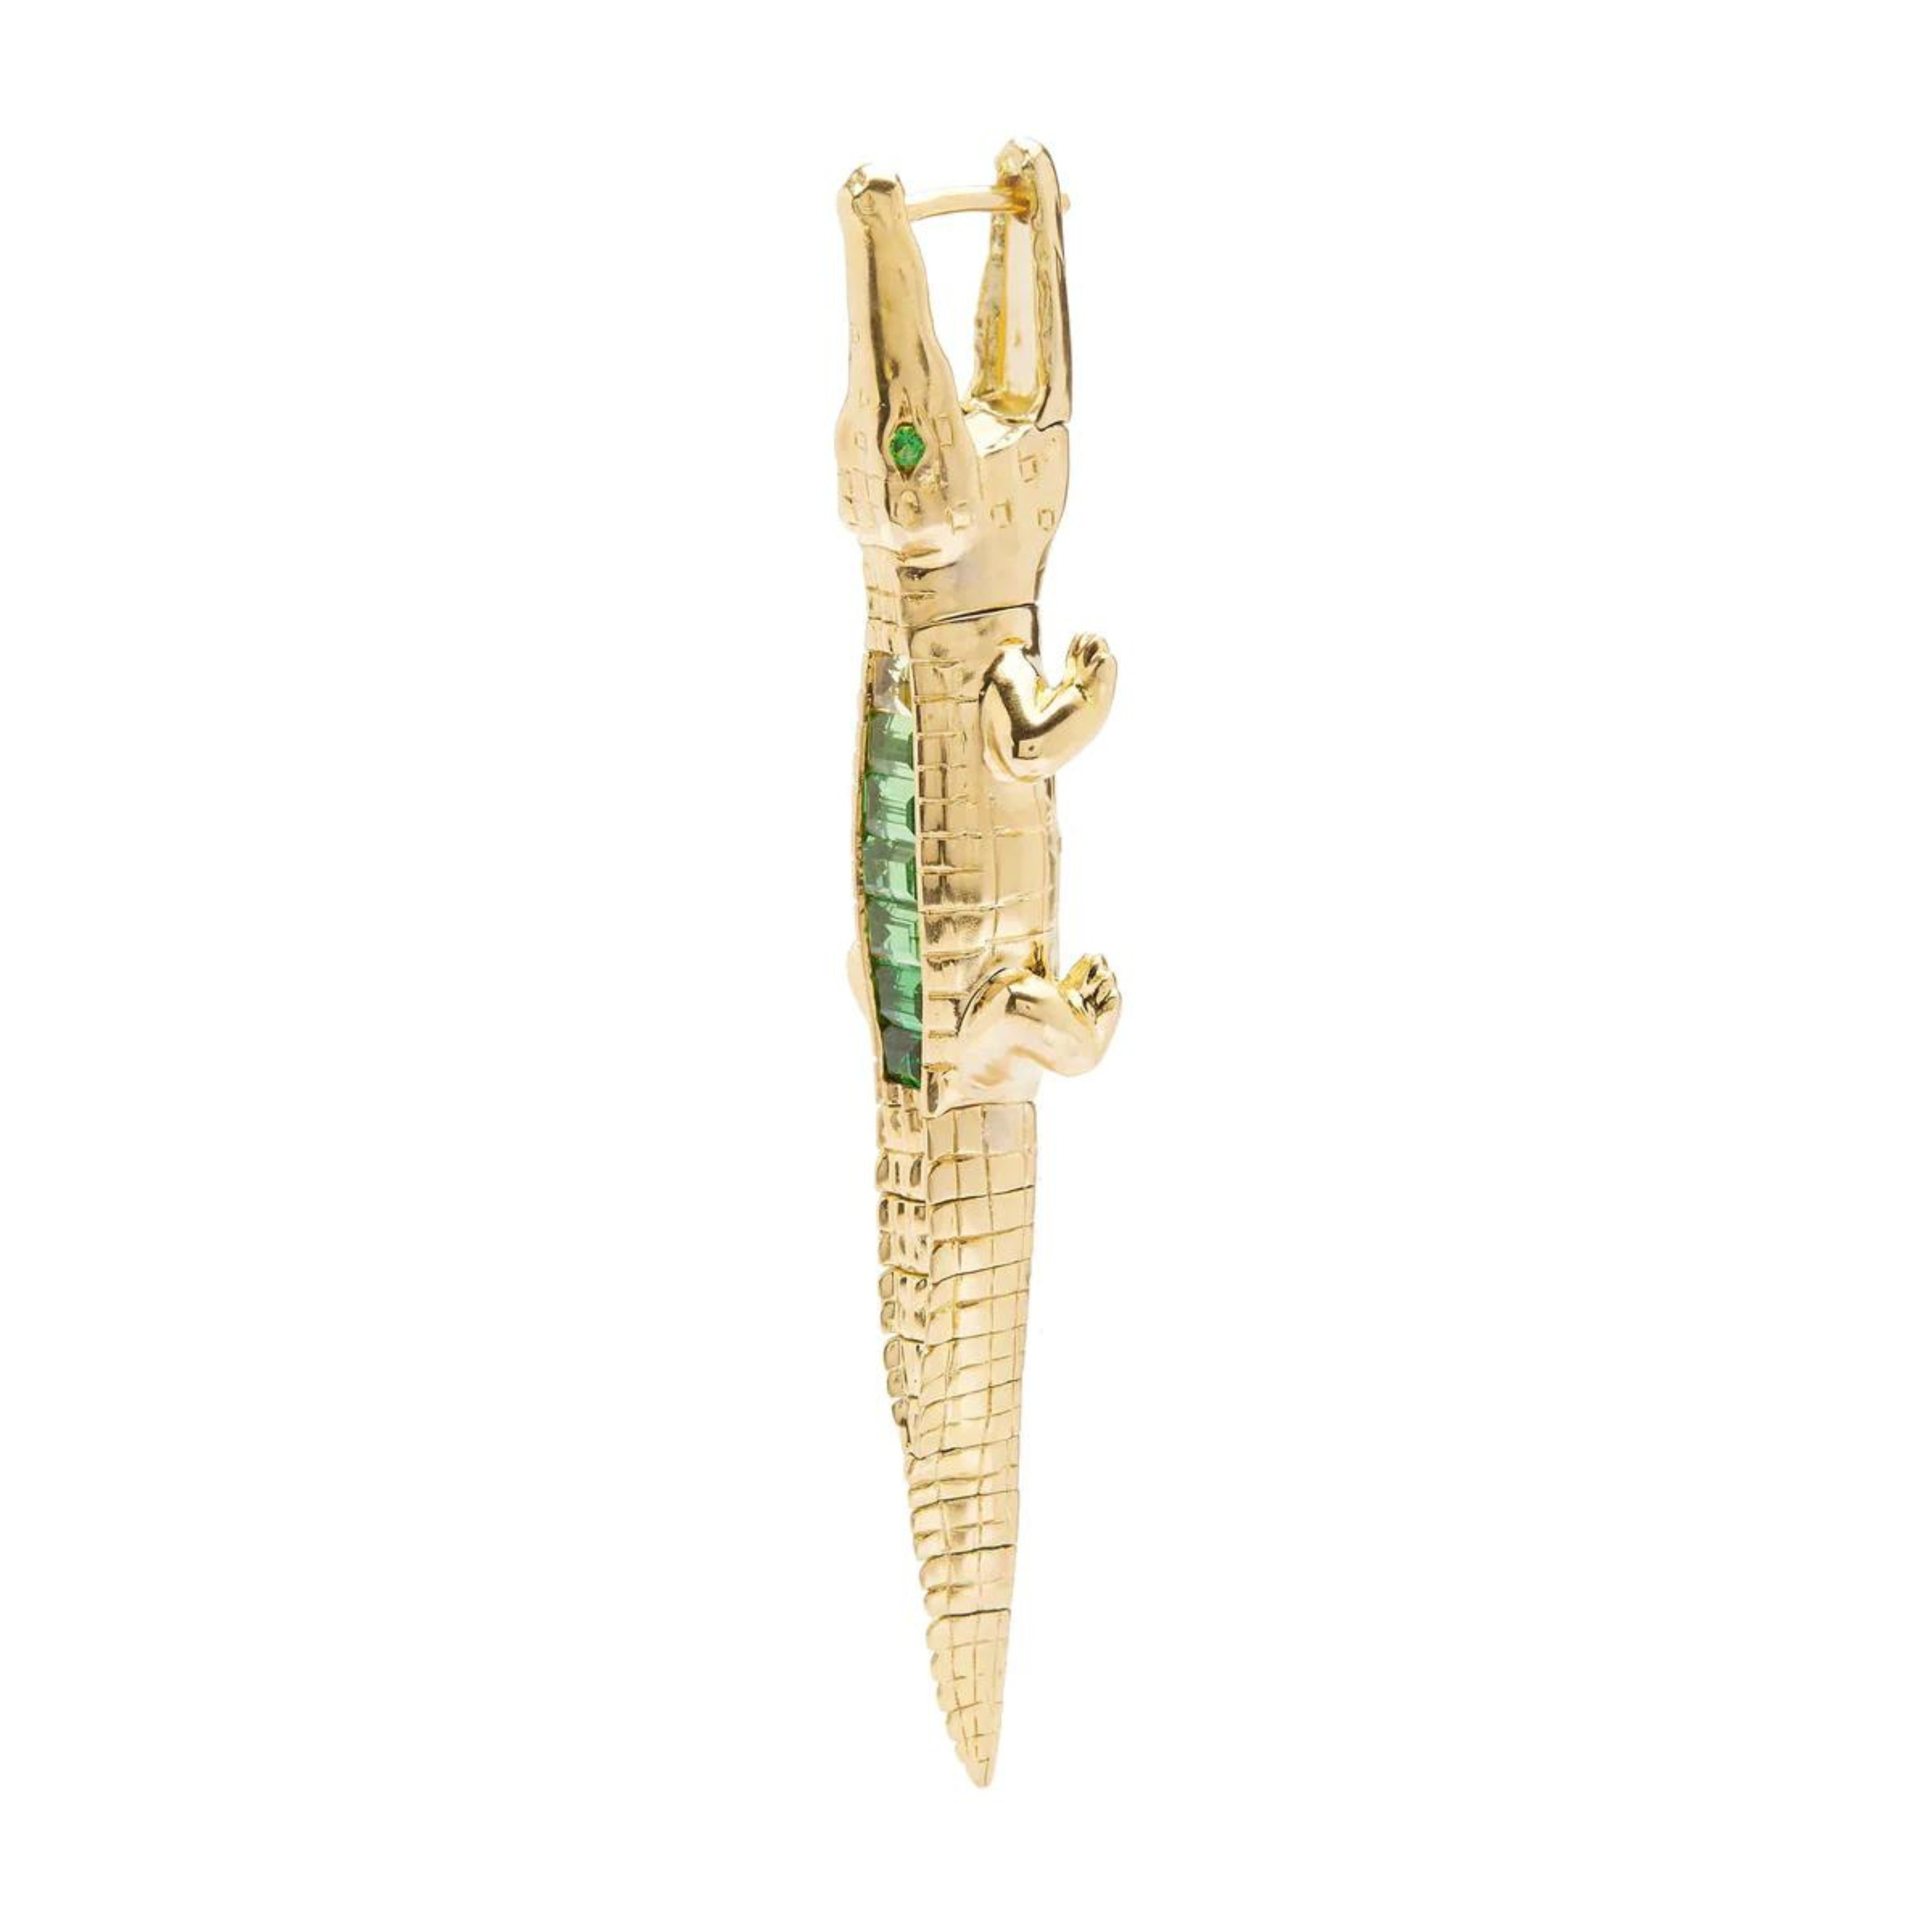 Bibi ven der Velden, Tsavorite Alligator Ear Bite Earring  Crafted in 18K yellow gold and featuring an arrangement of green tsavorites, the intricately carved design replicates an alligator&#39;s body. Shown from the side.